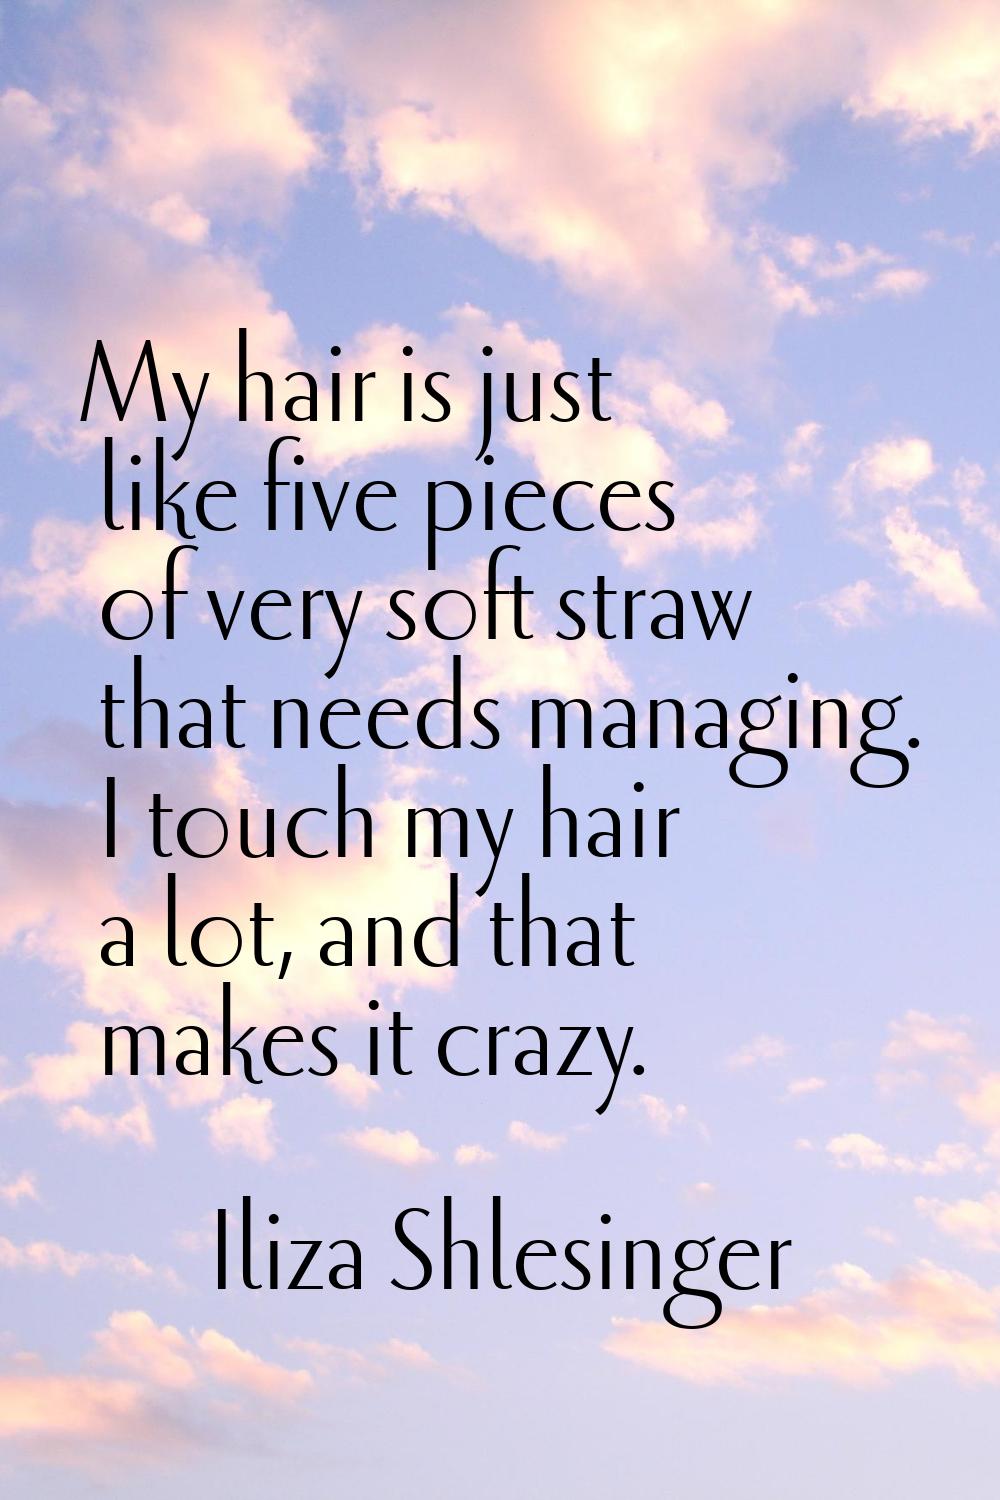 My hair is just like five pieces of very soft straw that needs managing. I touch my hair a lot, and